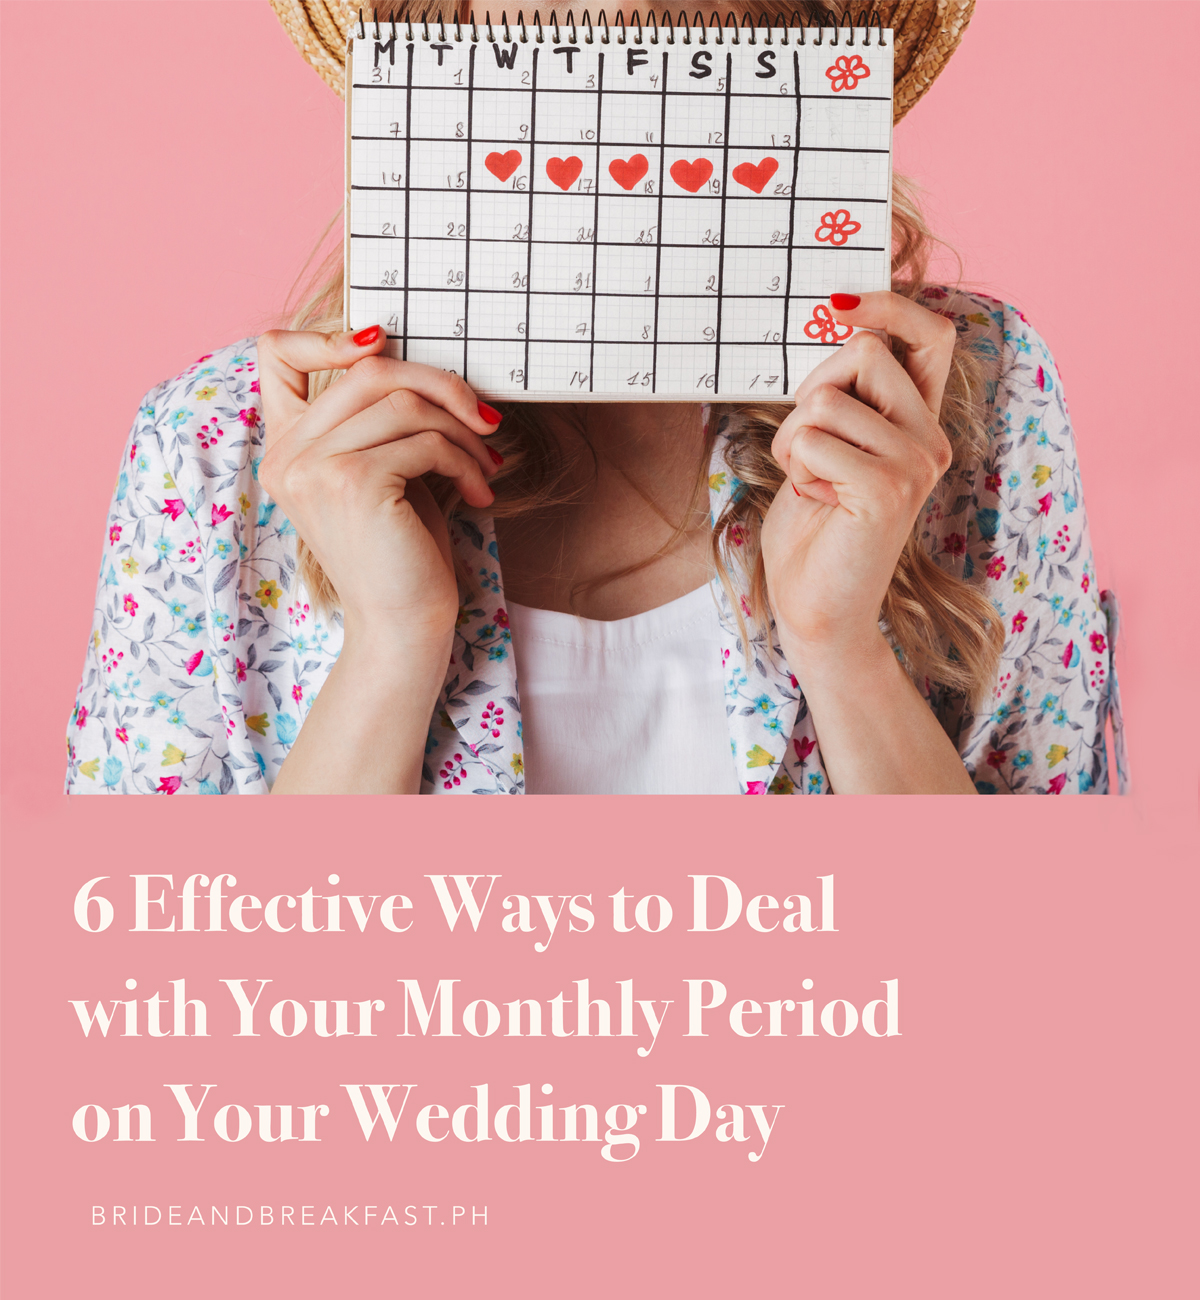 6 Effective Ways to Deal with Your Monthly Period on Your Wedding Day